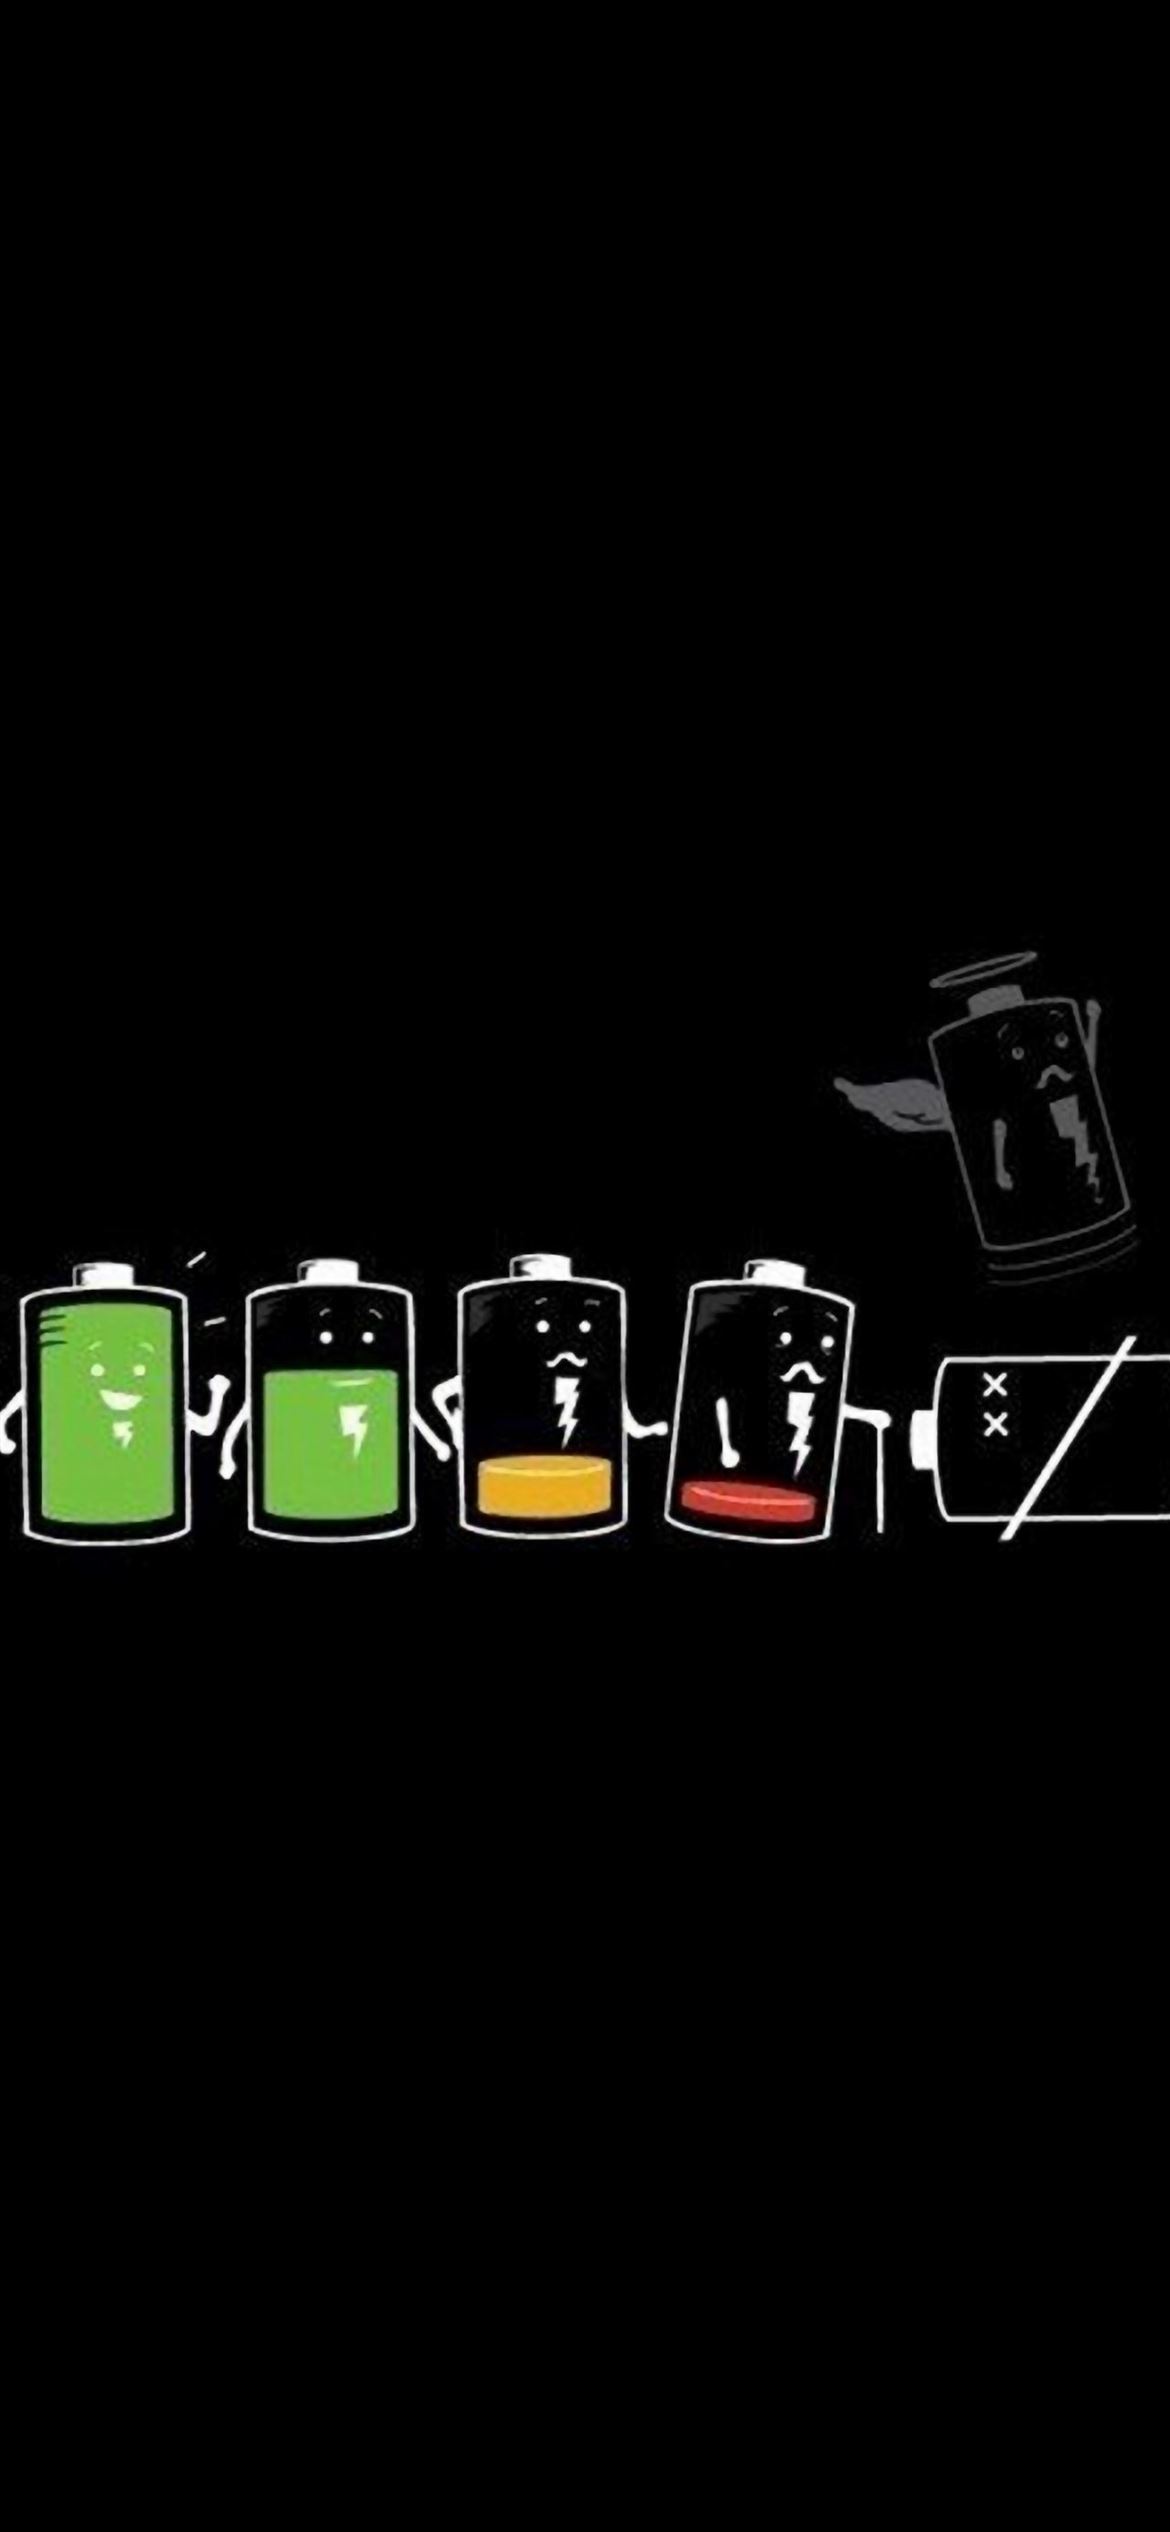 Battery Life Cycle Funny iPhone Wallpaper Free Download